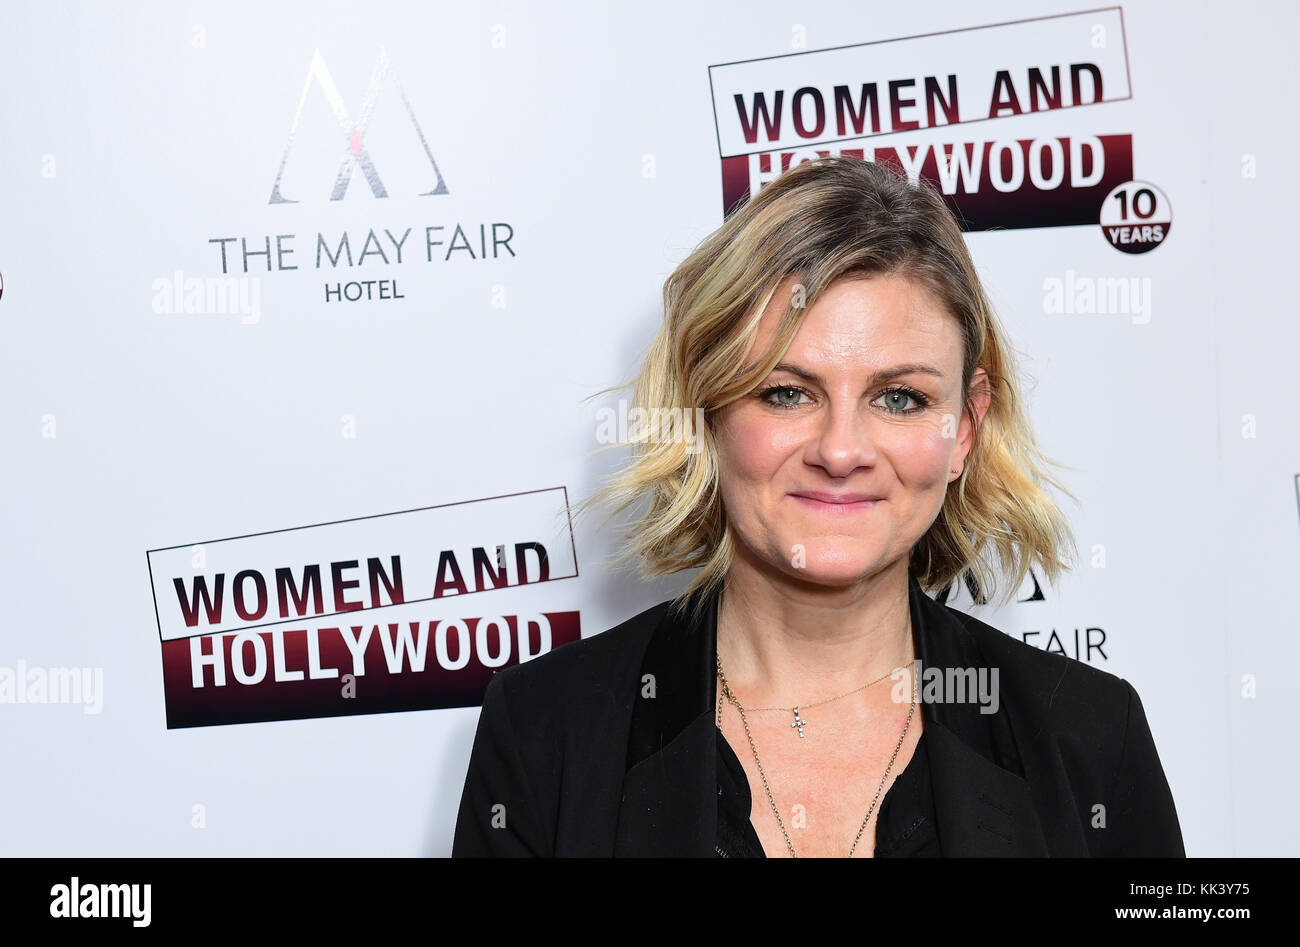 Zelda Perkins attending the Women and Hollywood 10th Anniversary Awards Celebration in London held at The May Fair Hotel, London. Stock Photo